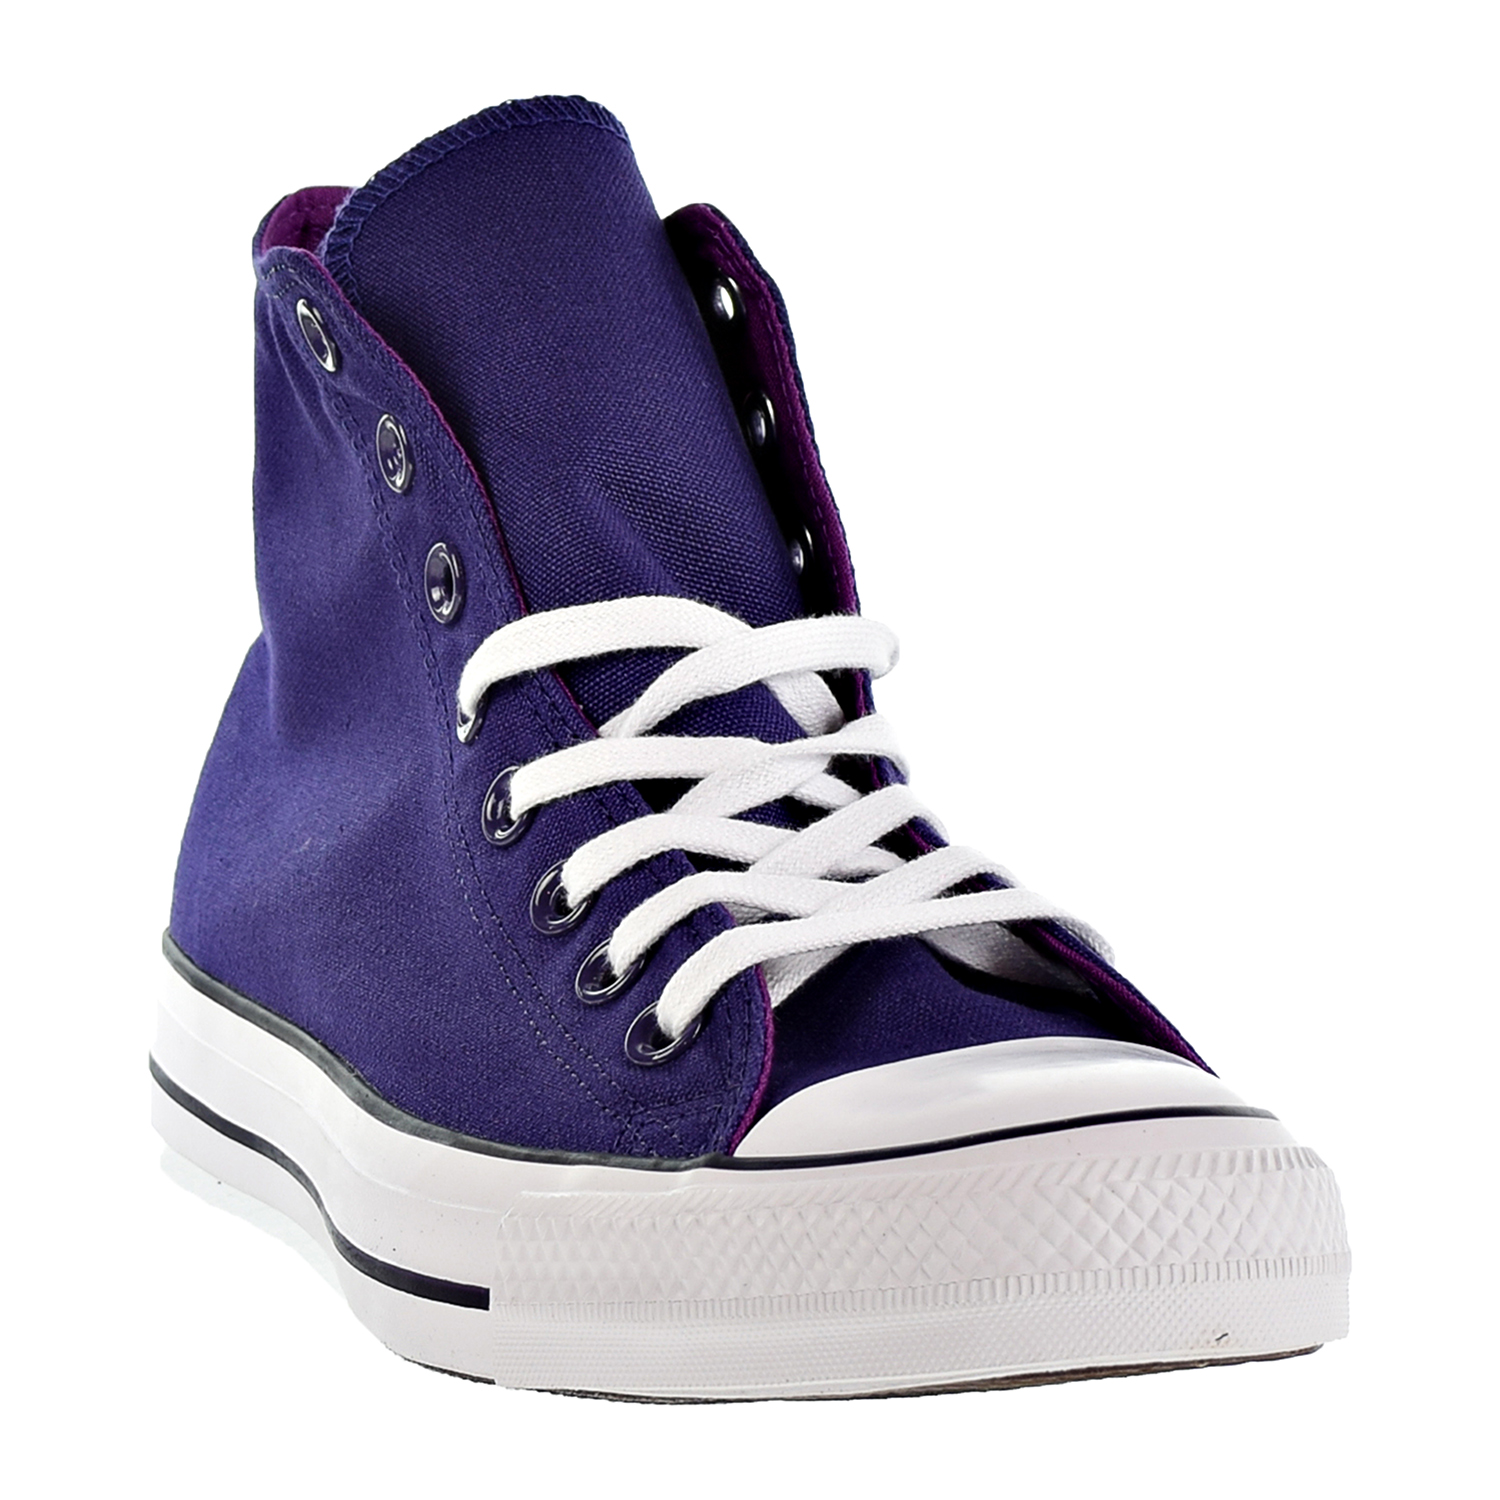 Converse Chuck Taylor All Star Seasonal Color Hi Unisex/Men's Shoes New Orchid 162450f - image 2 of 6